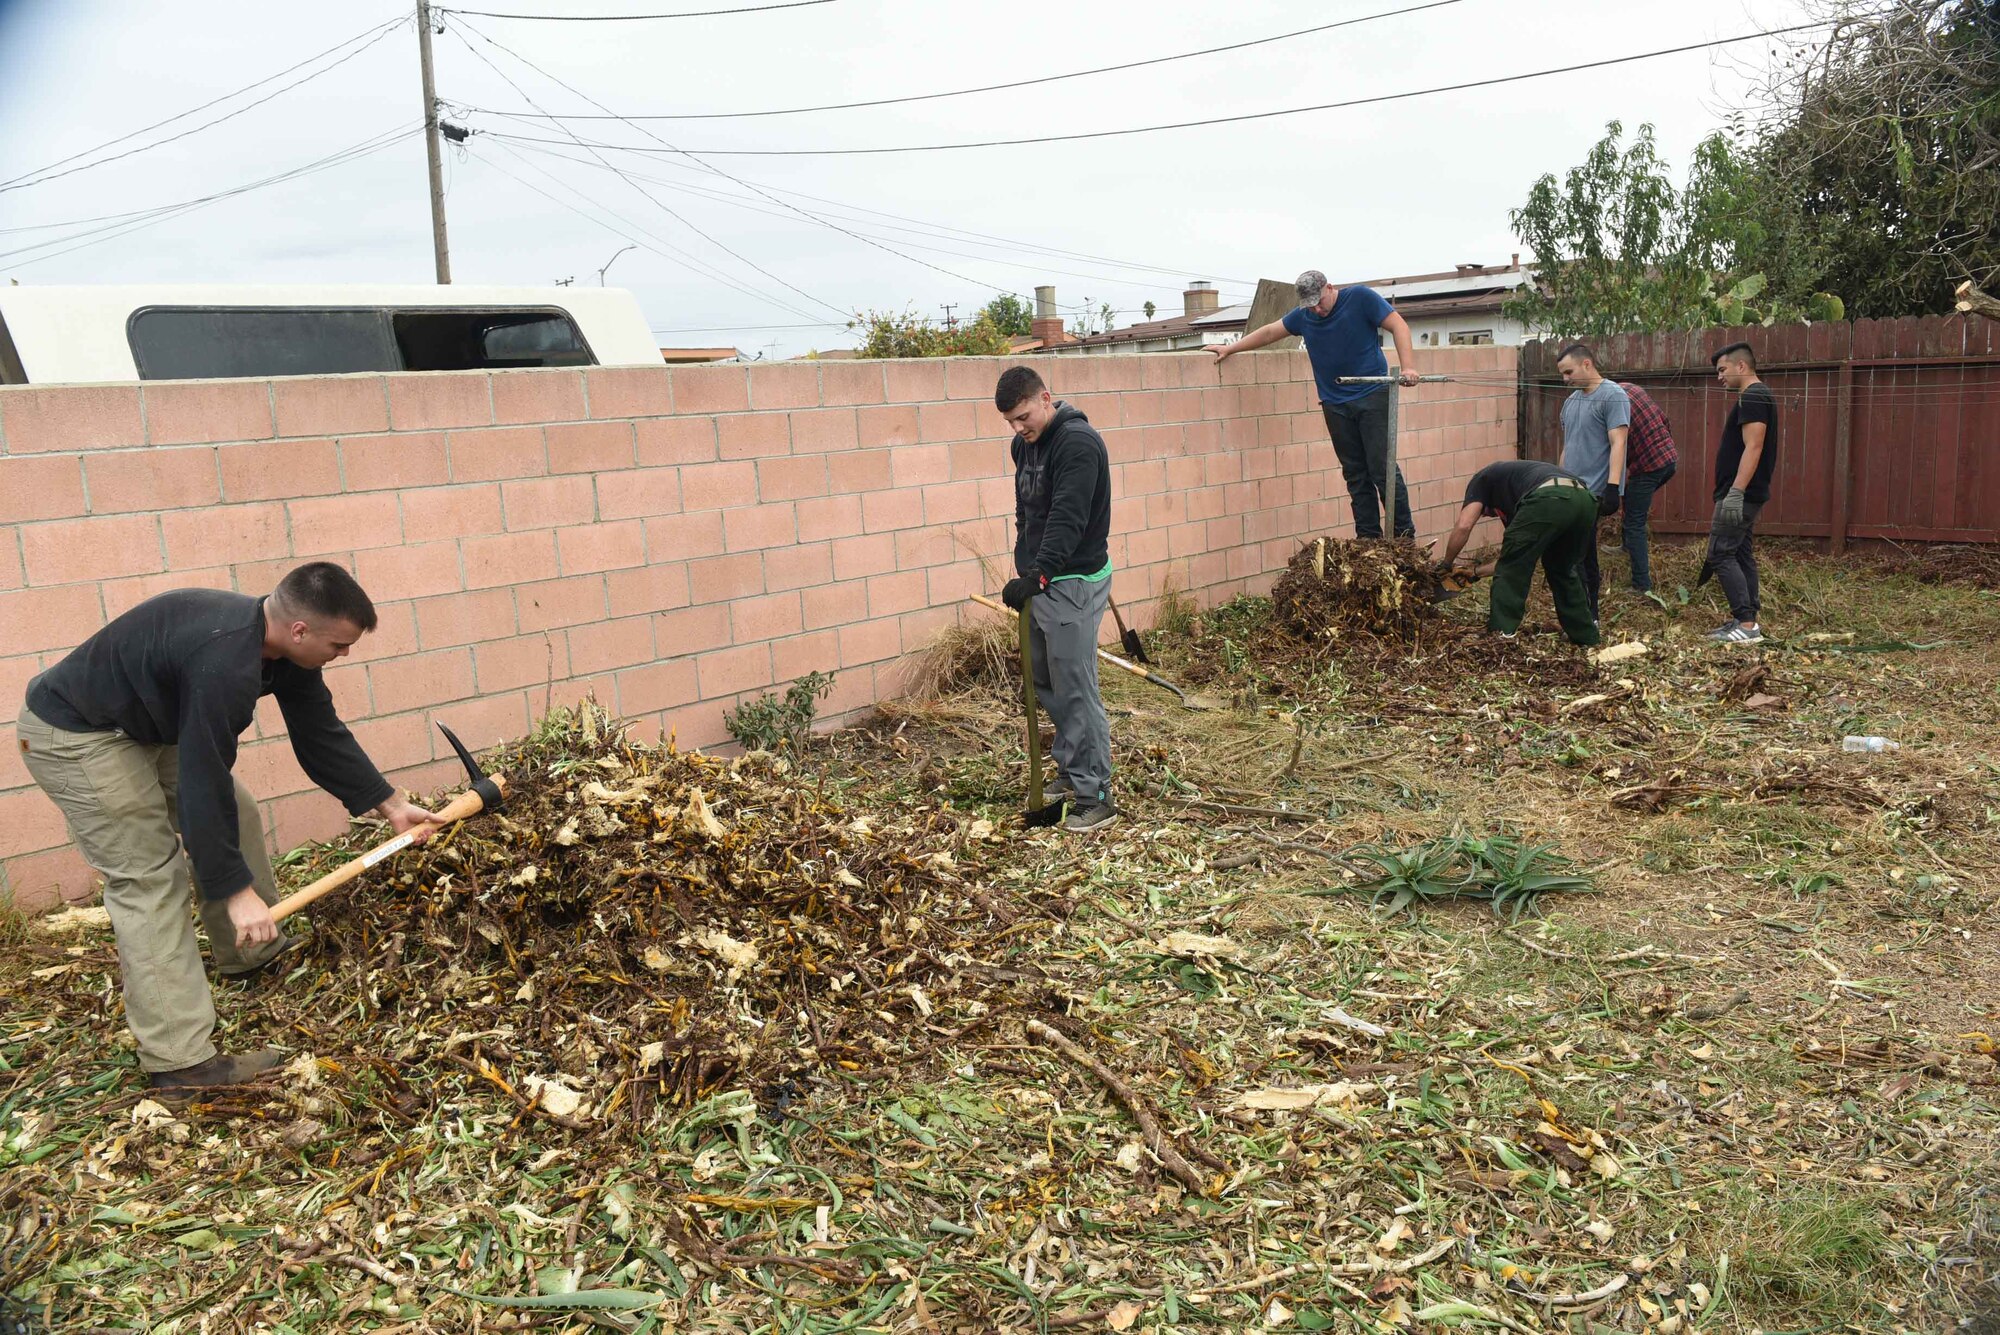 Vandenberg Airmen work together to support a Korean War veteran, Nov. 4, 2017, Santa Maria, Calif. The Airmen cleared out more than 6,000 pounds of green waste to save the Santa Maria home. (U.S. Air Force photo by Tech. Sgt. Jim Araos/Released)